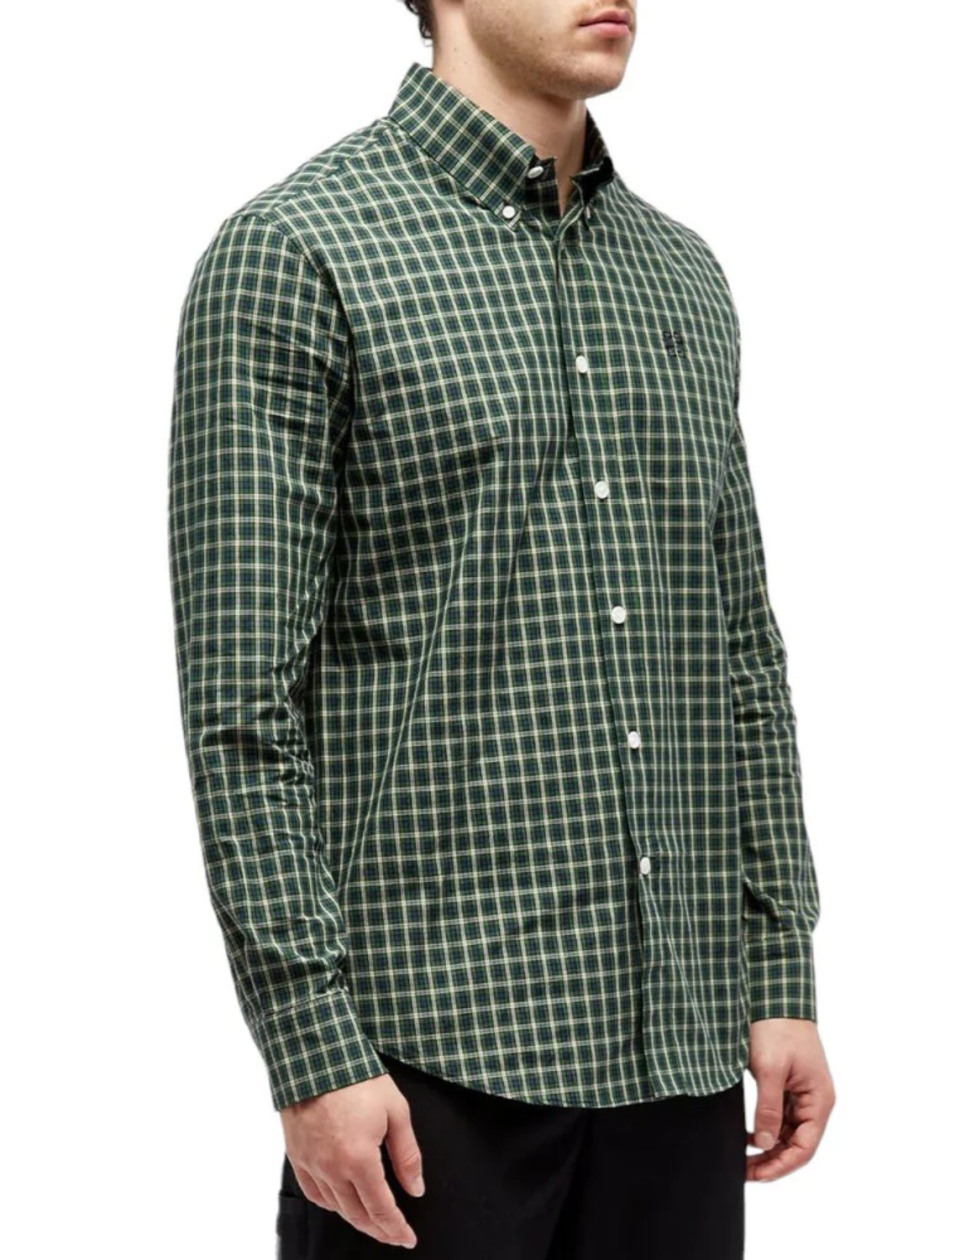 Givenchy Checked Shirt in Poplin Multicolor